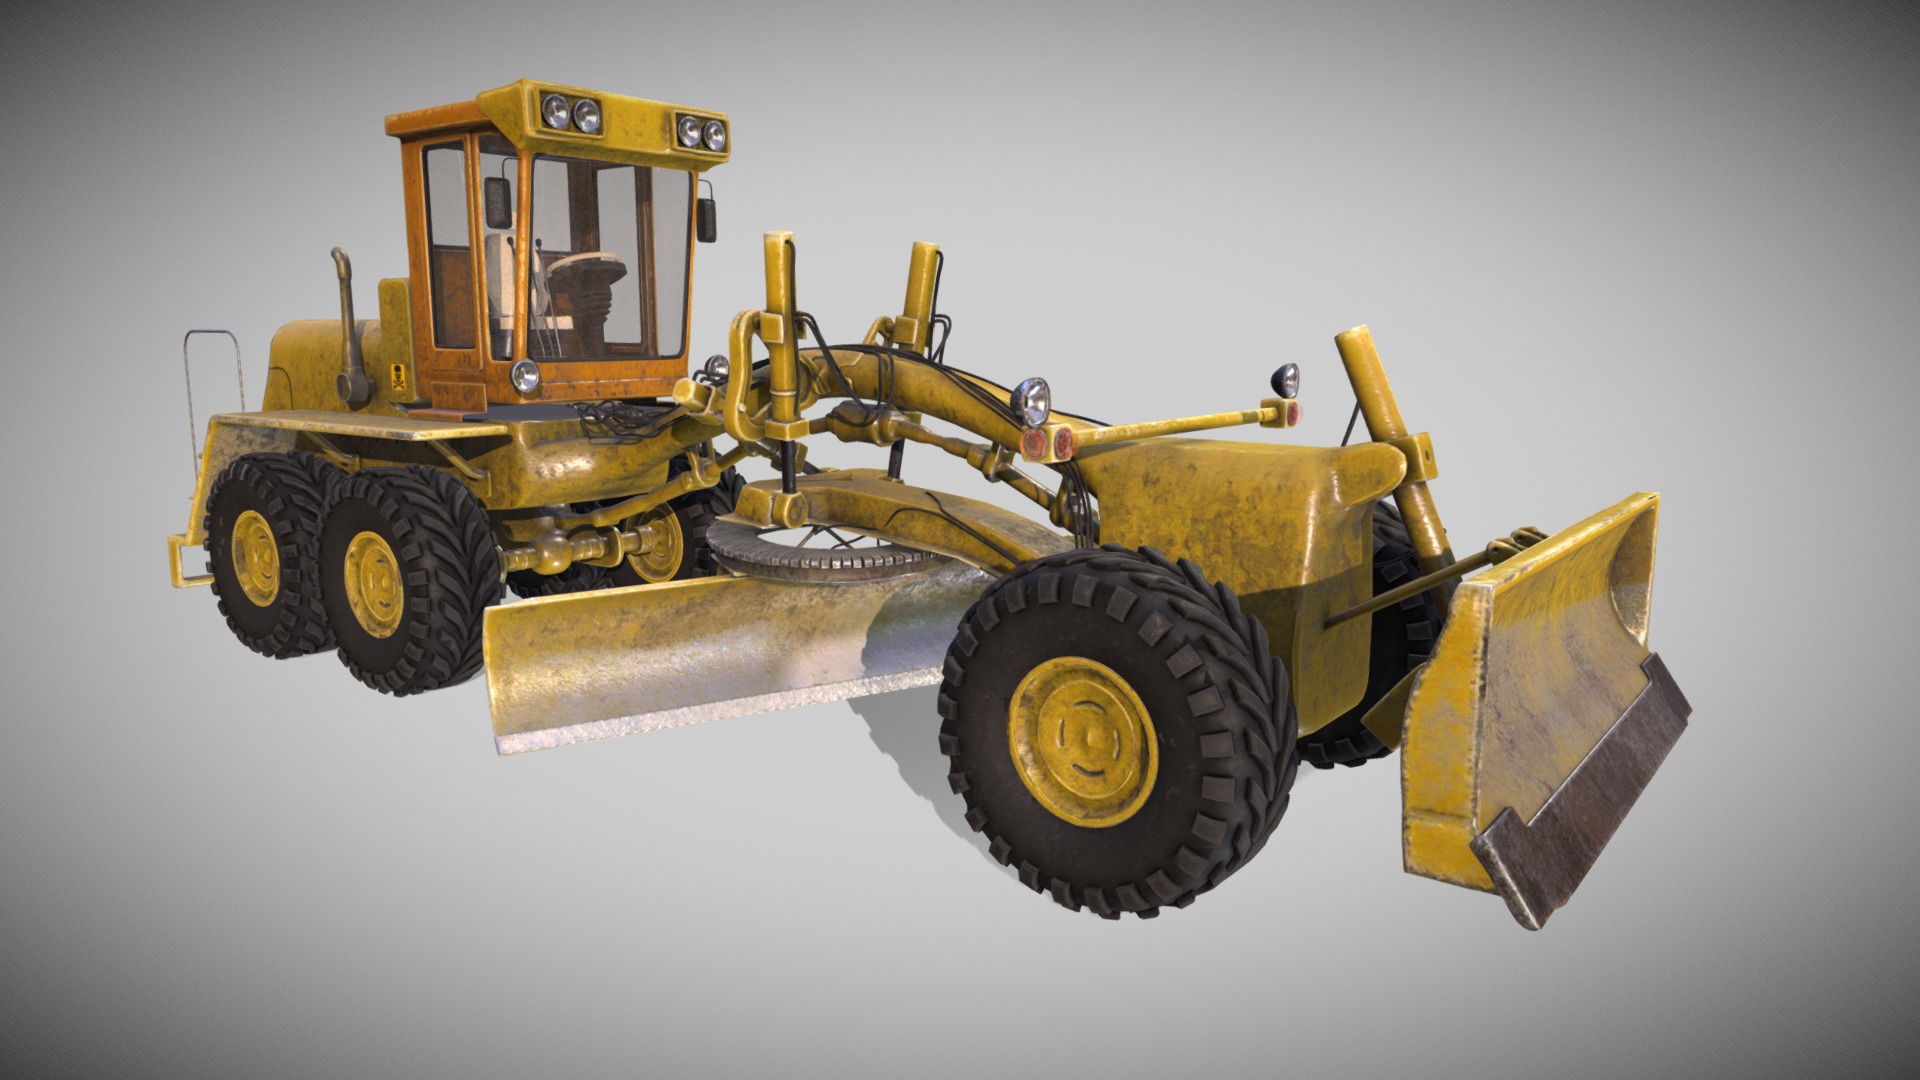 3D model Grader - This is a 3D model of the Grader. The 3D model is about a yellow and black tractor.